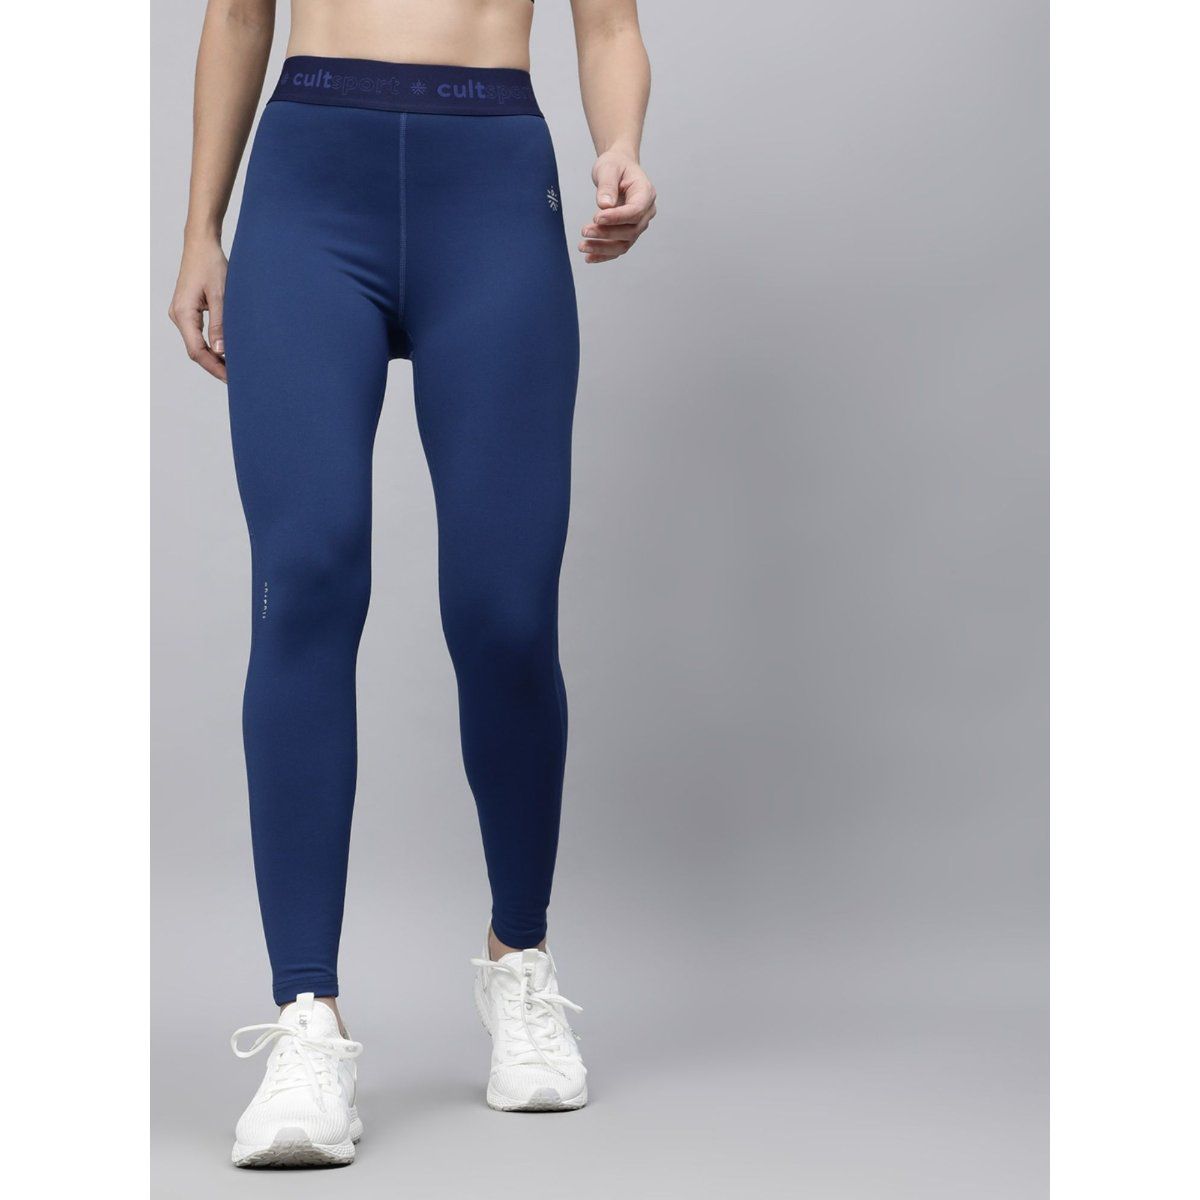 Buy AbsoluteFit Solid Workout Tights for Women Online | Cultsport